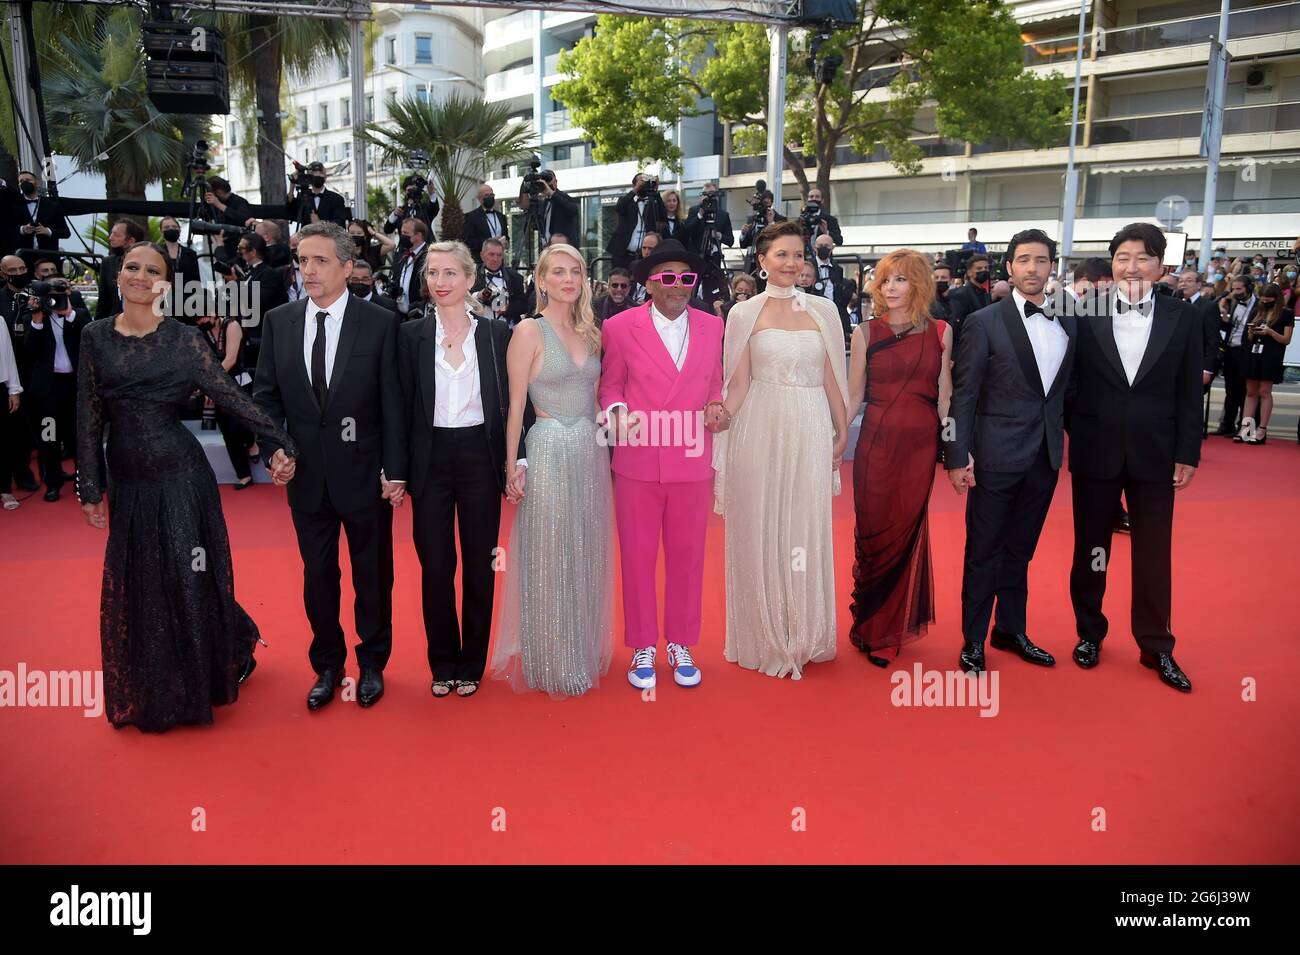 Cannes, France. 06th July, 2021. 74th Cannes Film Festival 2021, Red Carpet film : ‘Annette' and Opening ceremony. Pictured: Spike Lee, Melanie Laurent, Mylene Farmer, Jessica Hausner, Maggie Gyllenhaal, Mati Diop, Tahar Rahim, Song Kang-ho, Kleber Mendonca Filho Credit: Independent Photo Agency/Alamy Live News Stock Photo